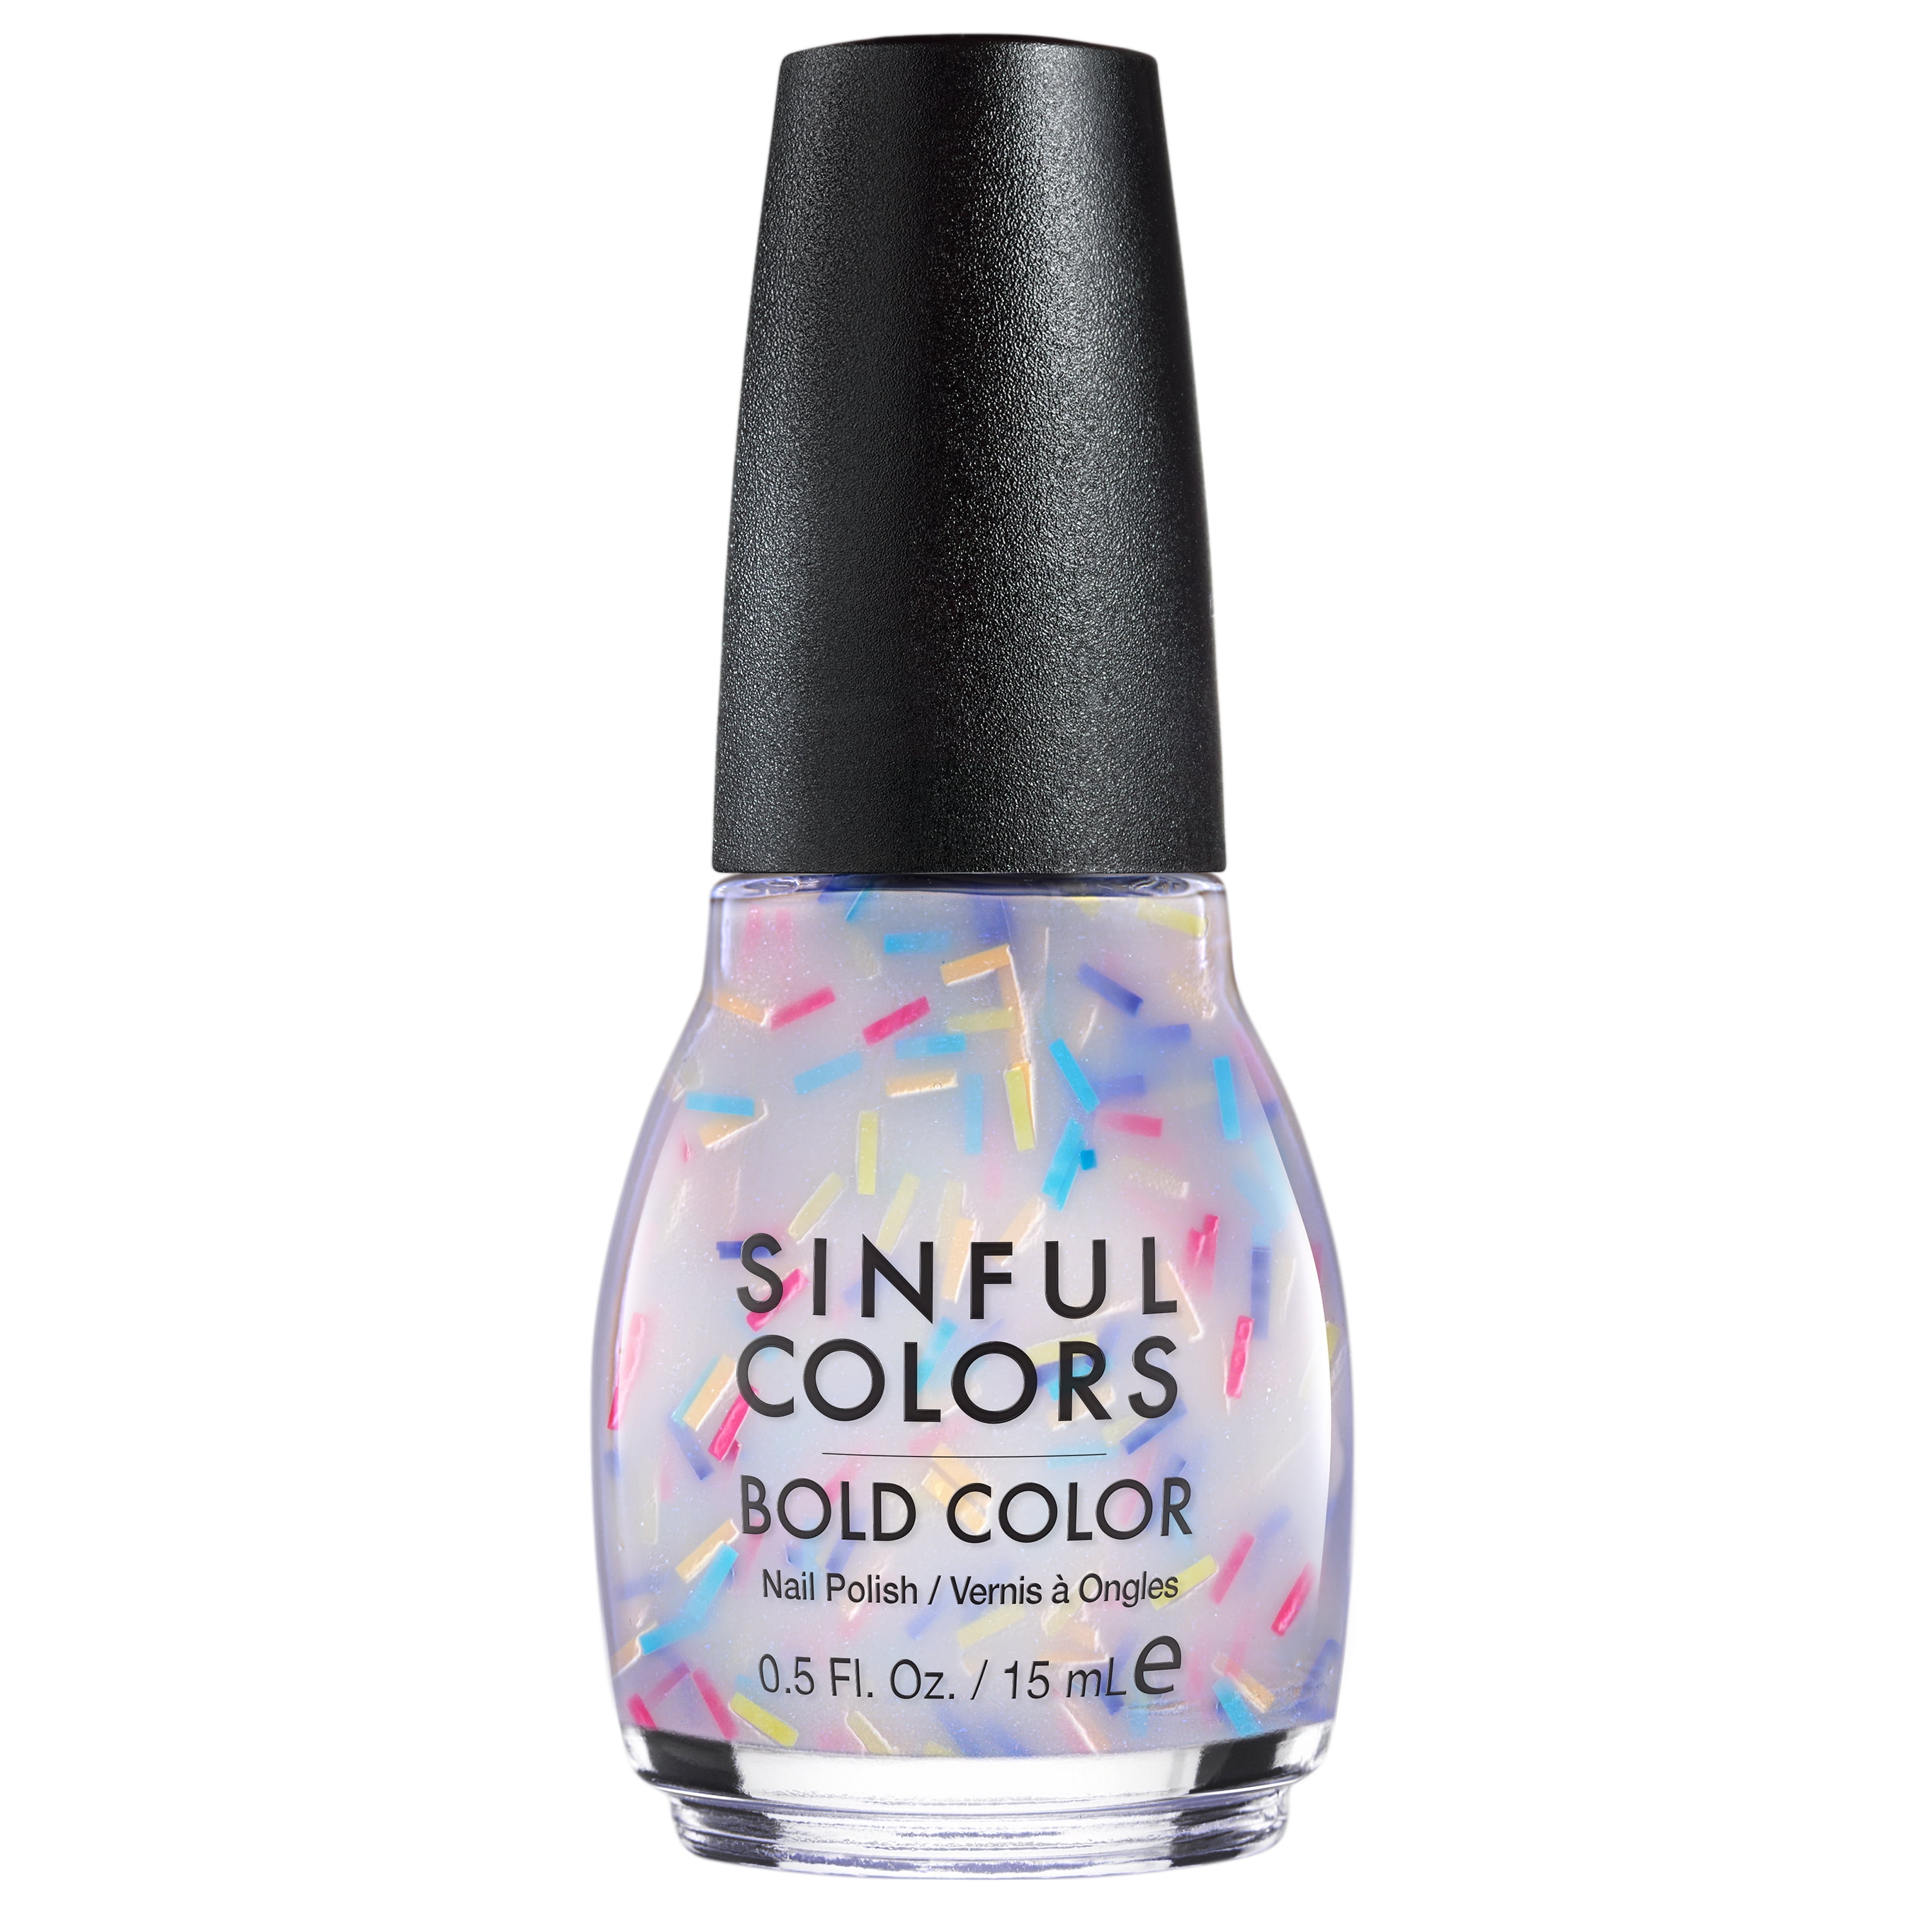 Sinful Colors Sweet and Salty Nail Polish - Donut Even - Walmart.com